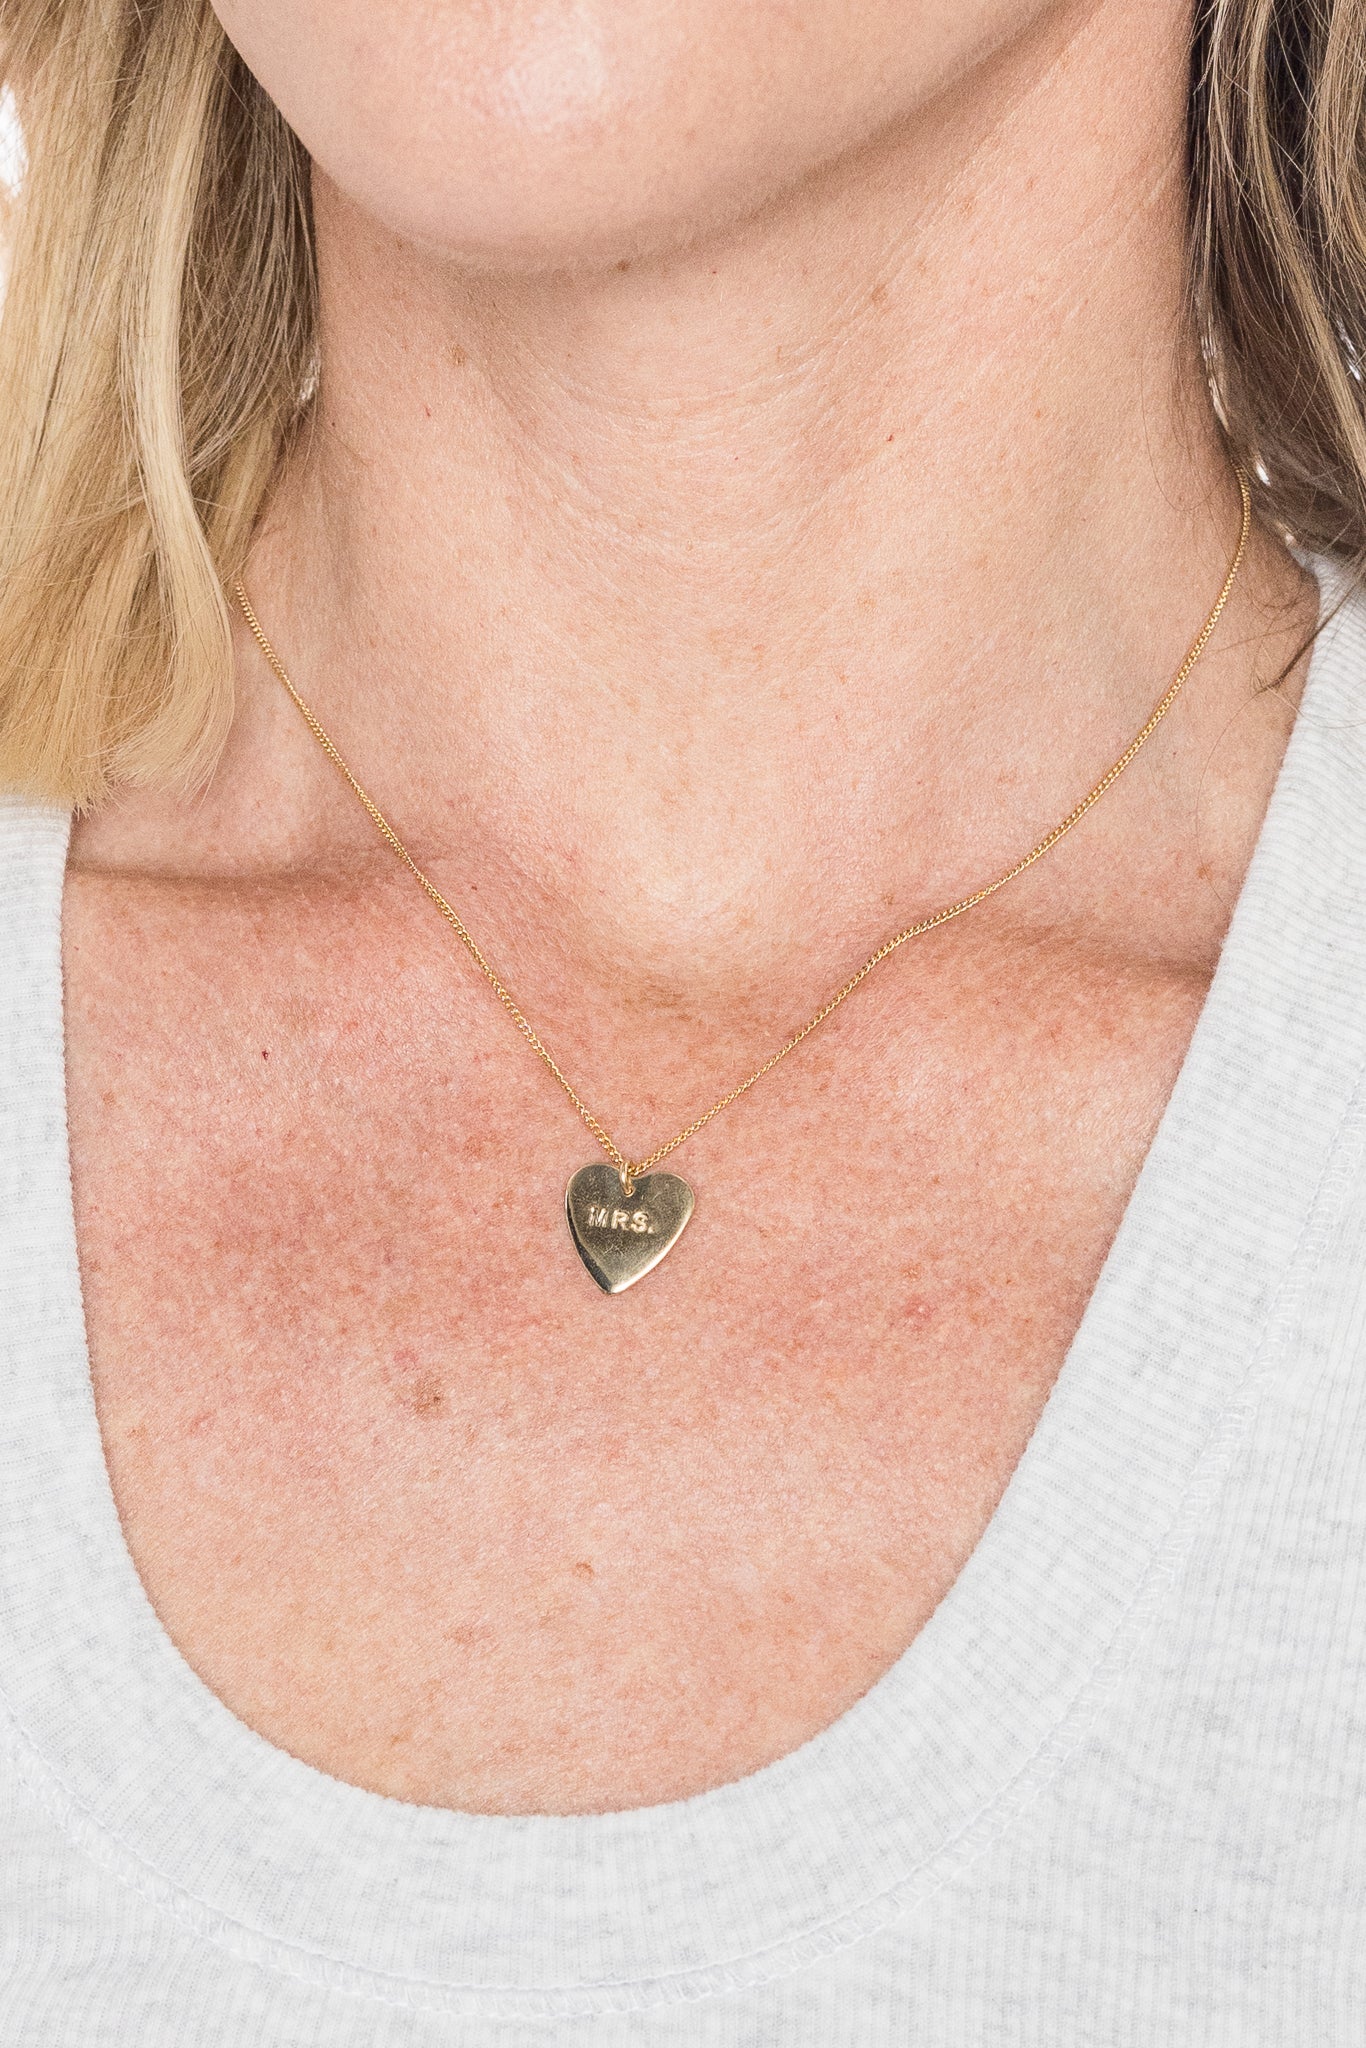 Mrs Heart Necklace